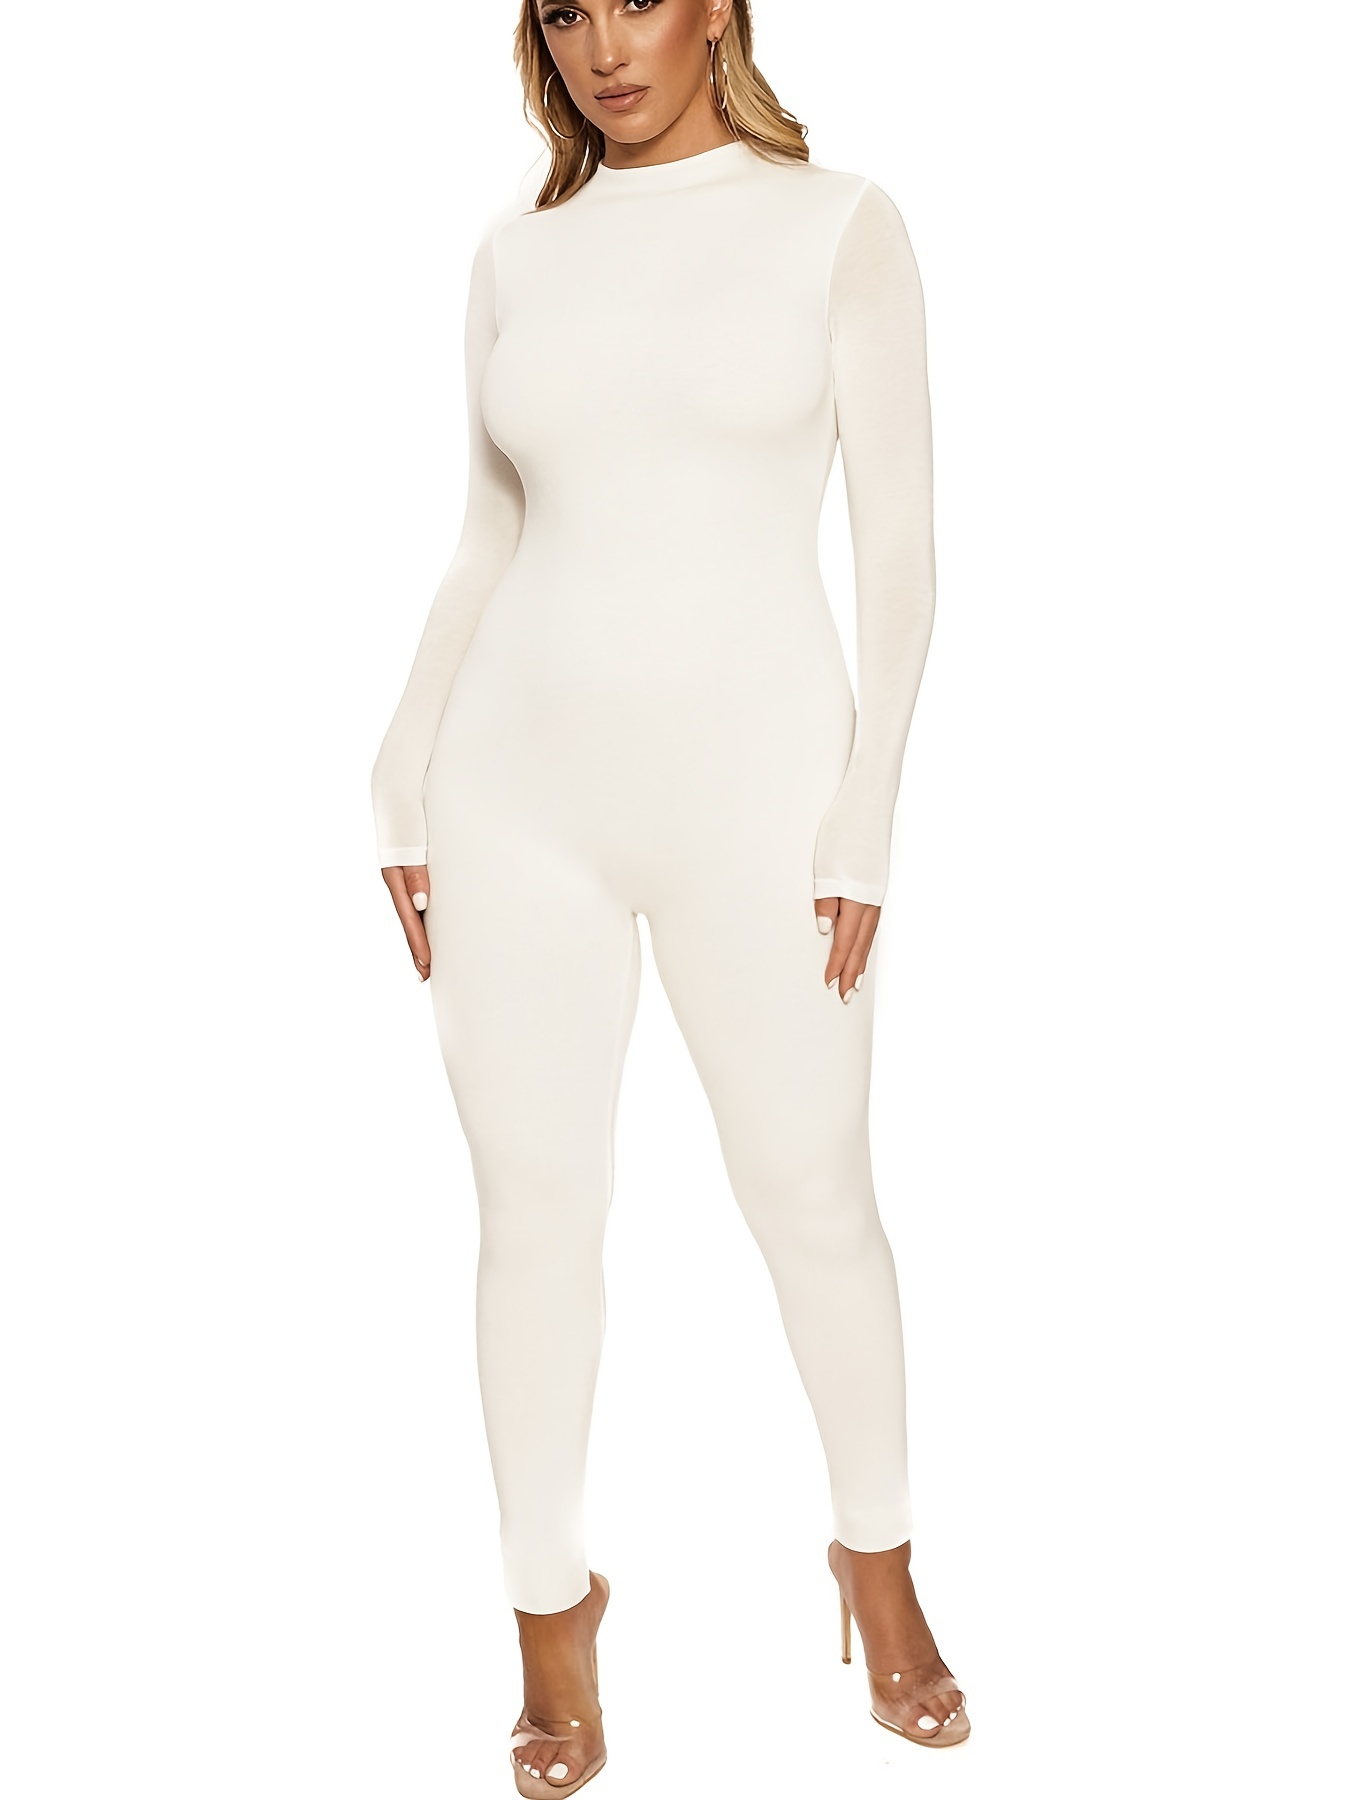 Boofeenaa Sport One Piece Outfit Winter Clothes Women Zipper Long Sleeve  Bodycon Jumpsuit Activewear Baddie Clothes C95 size S Color White